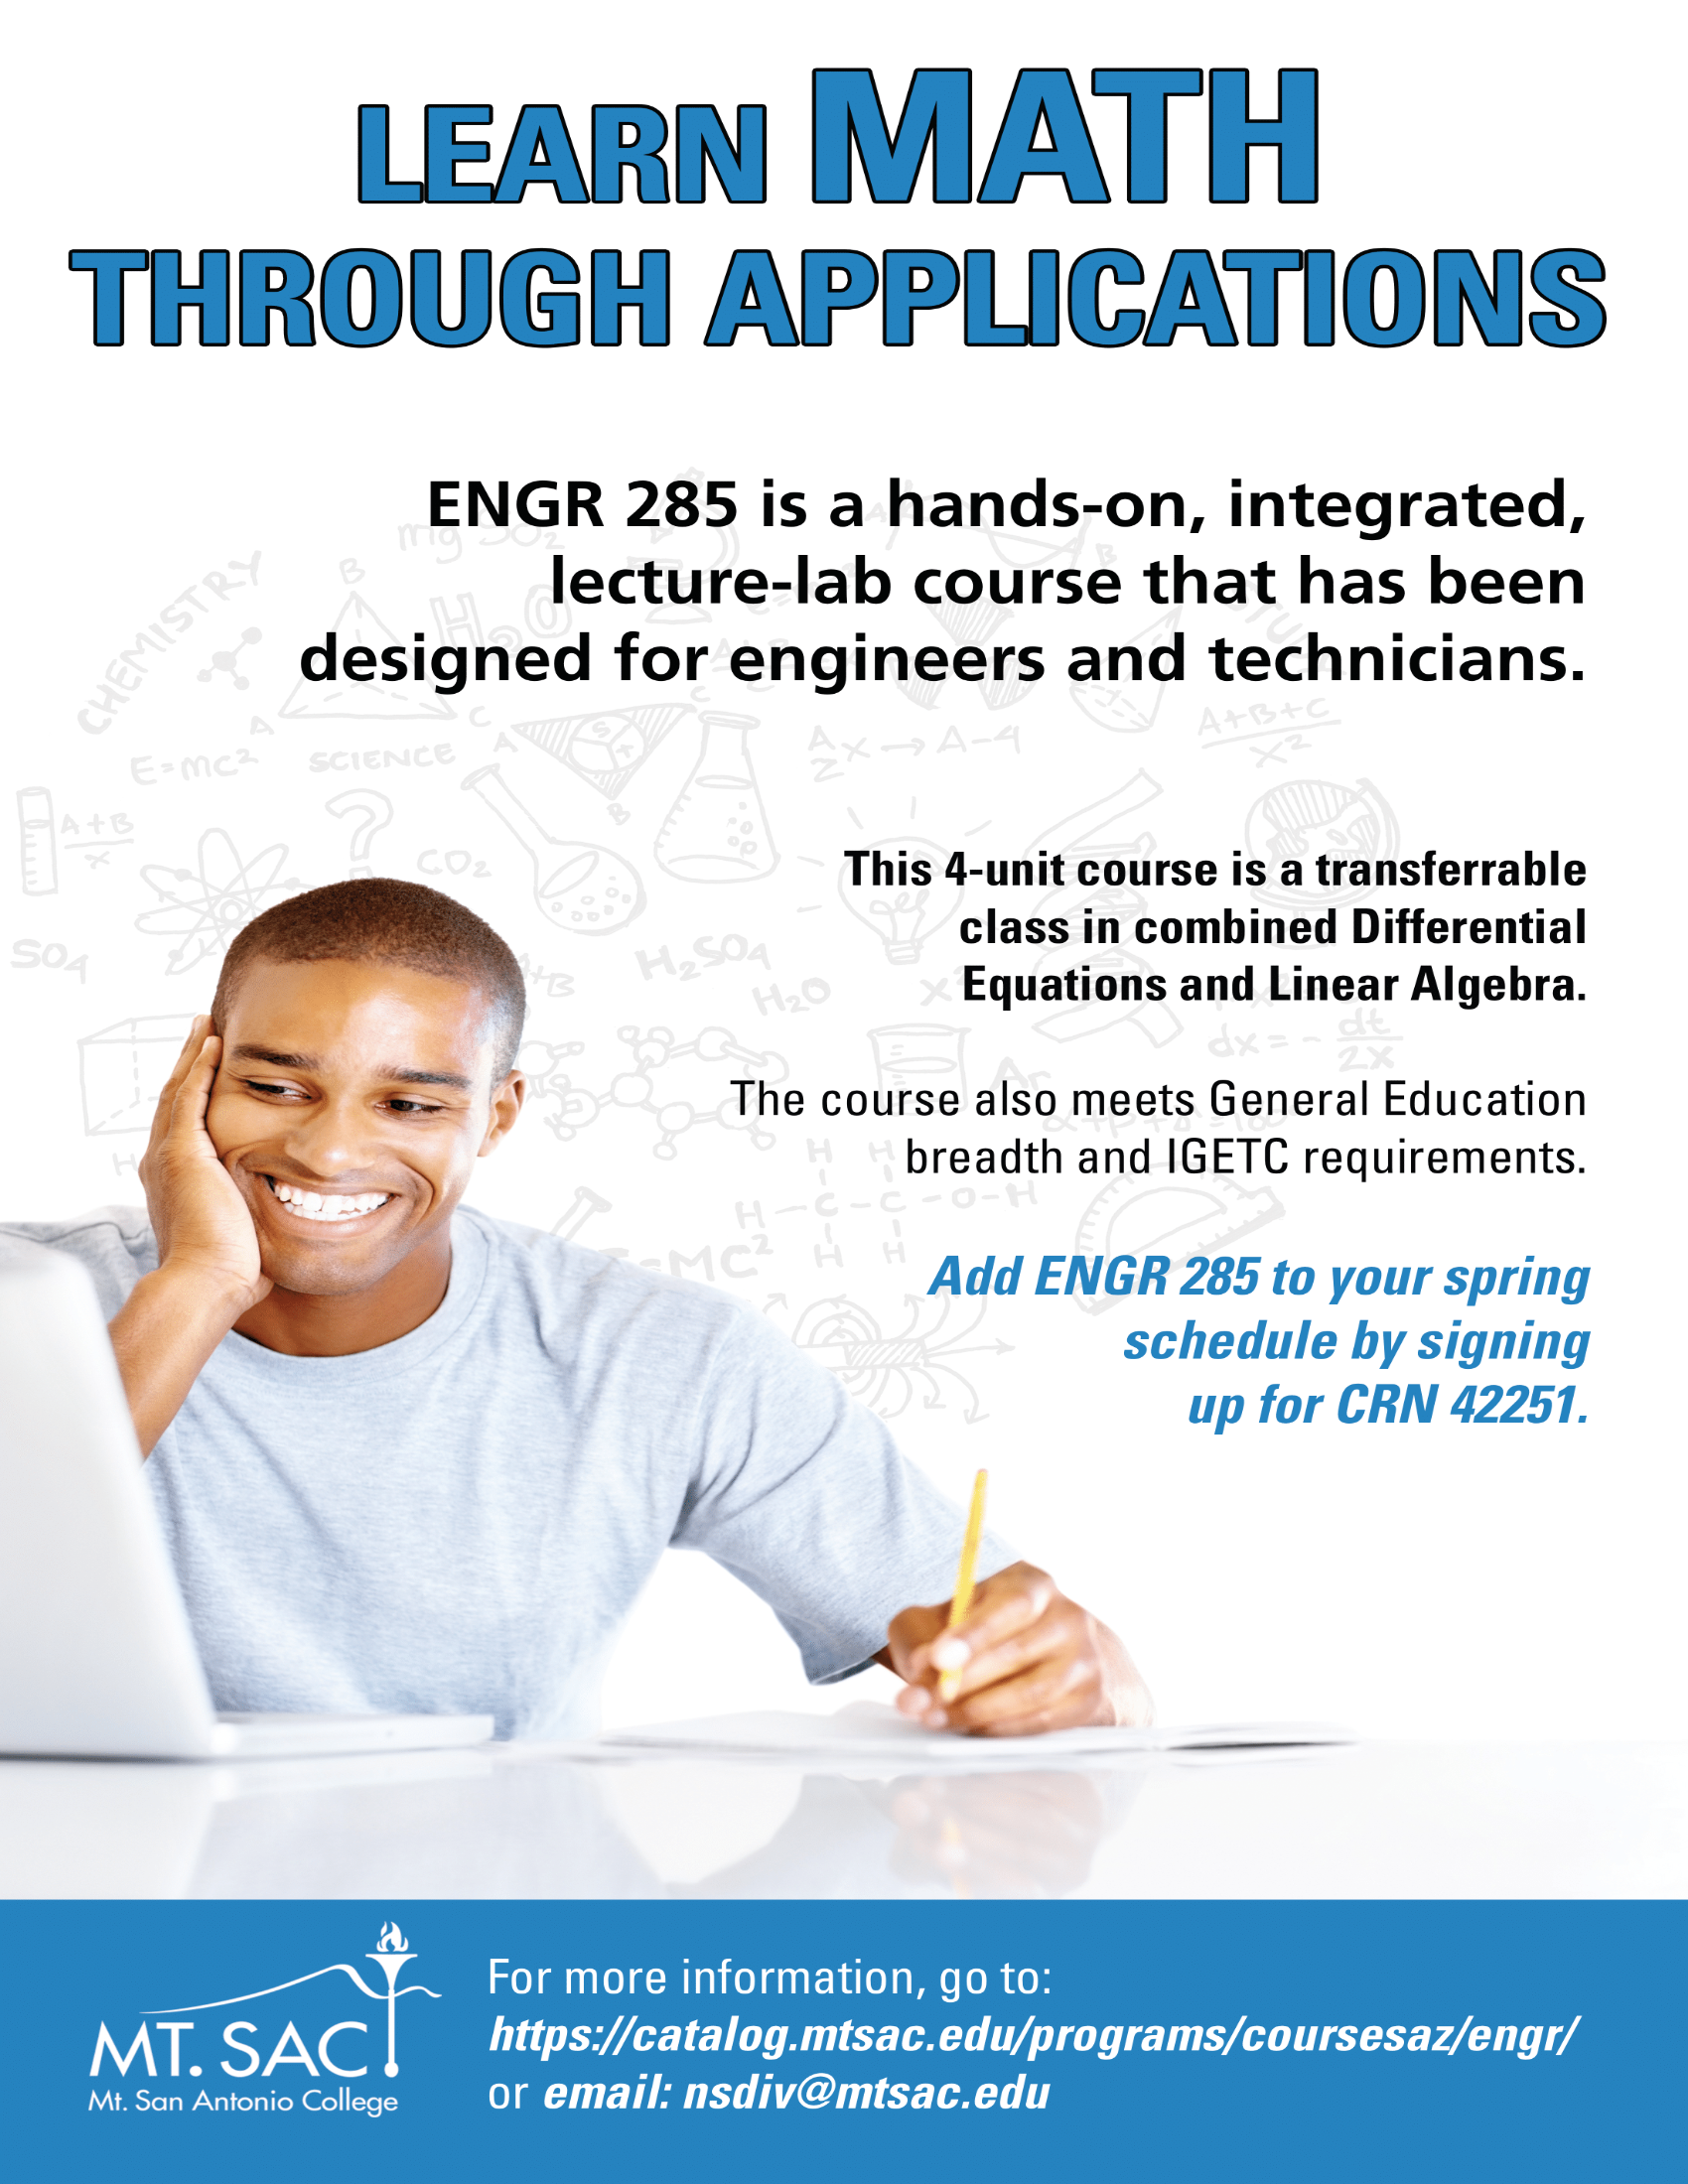 ENGR285 Course Advertisement for Spring 2022